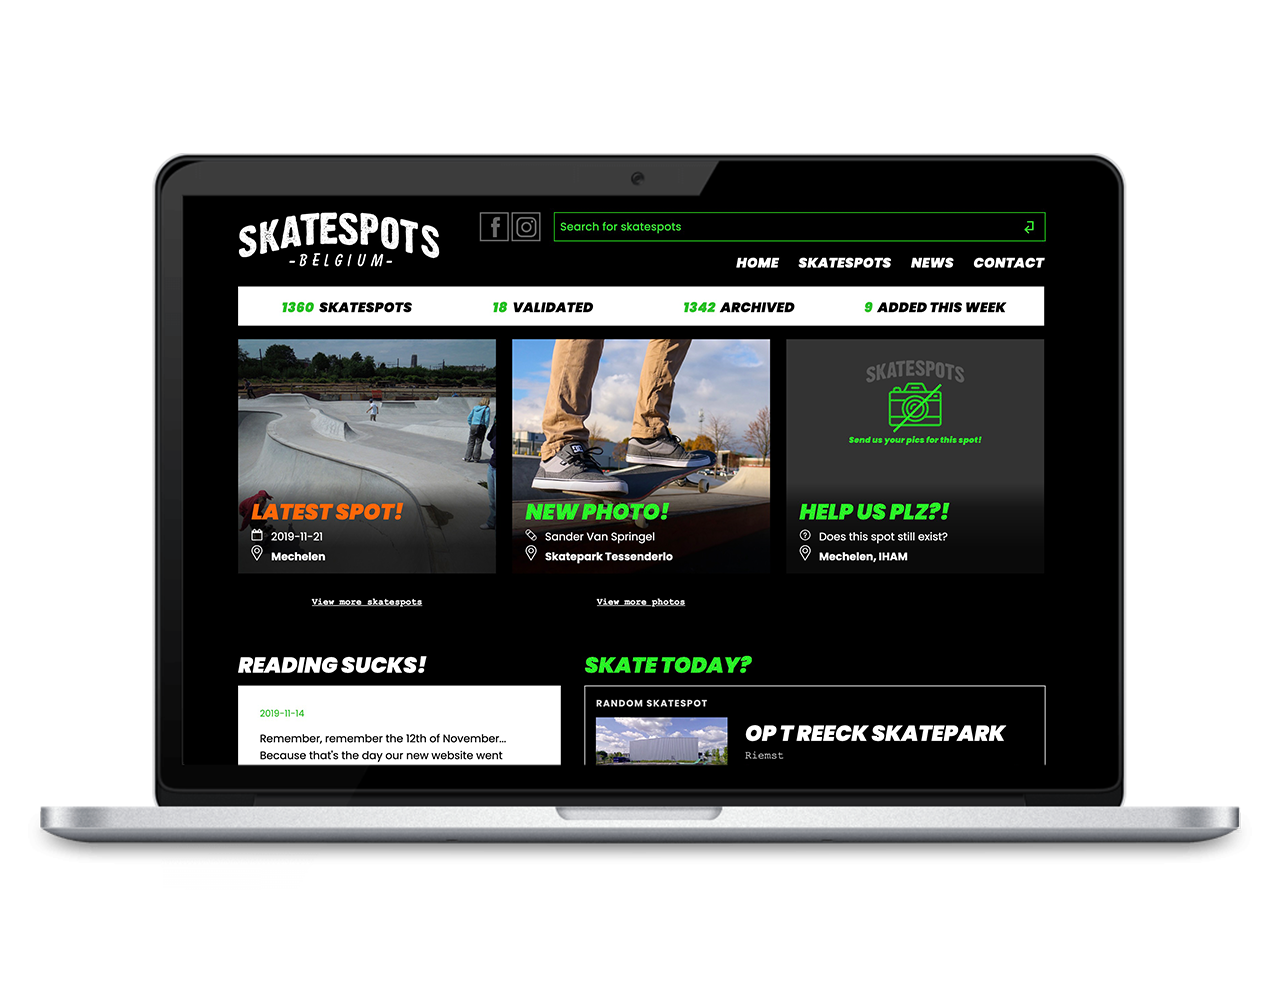 What do you think of the new Skatespots website?